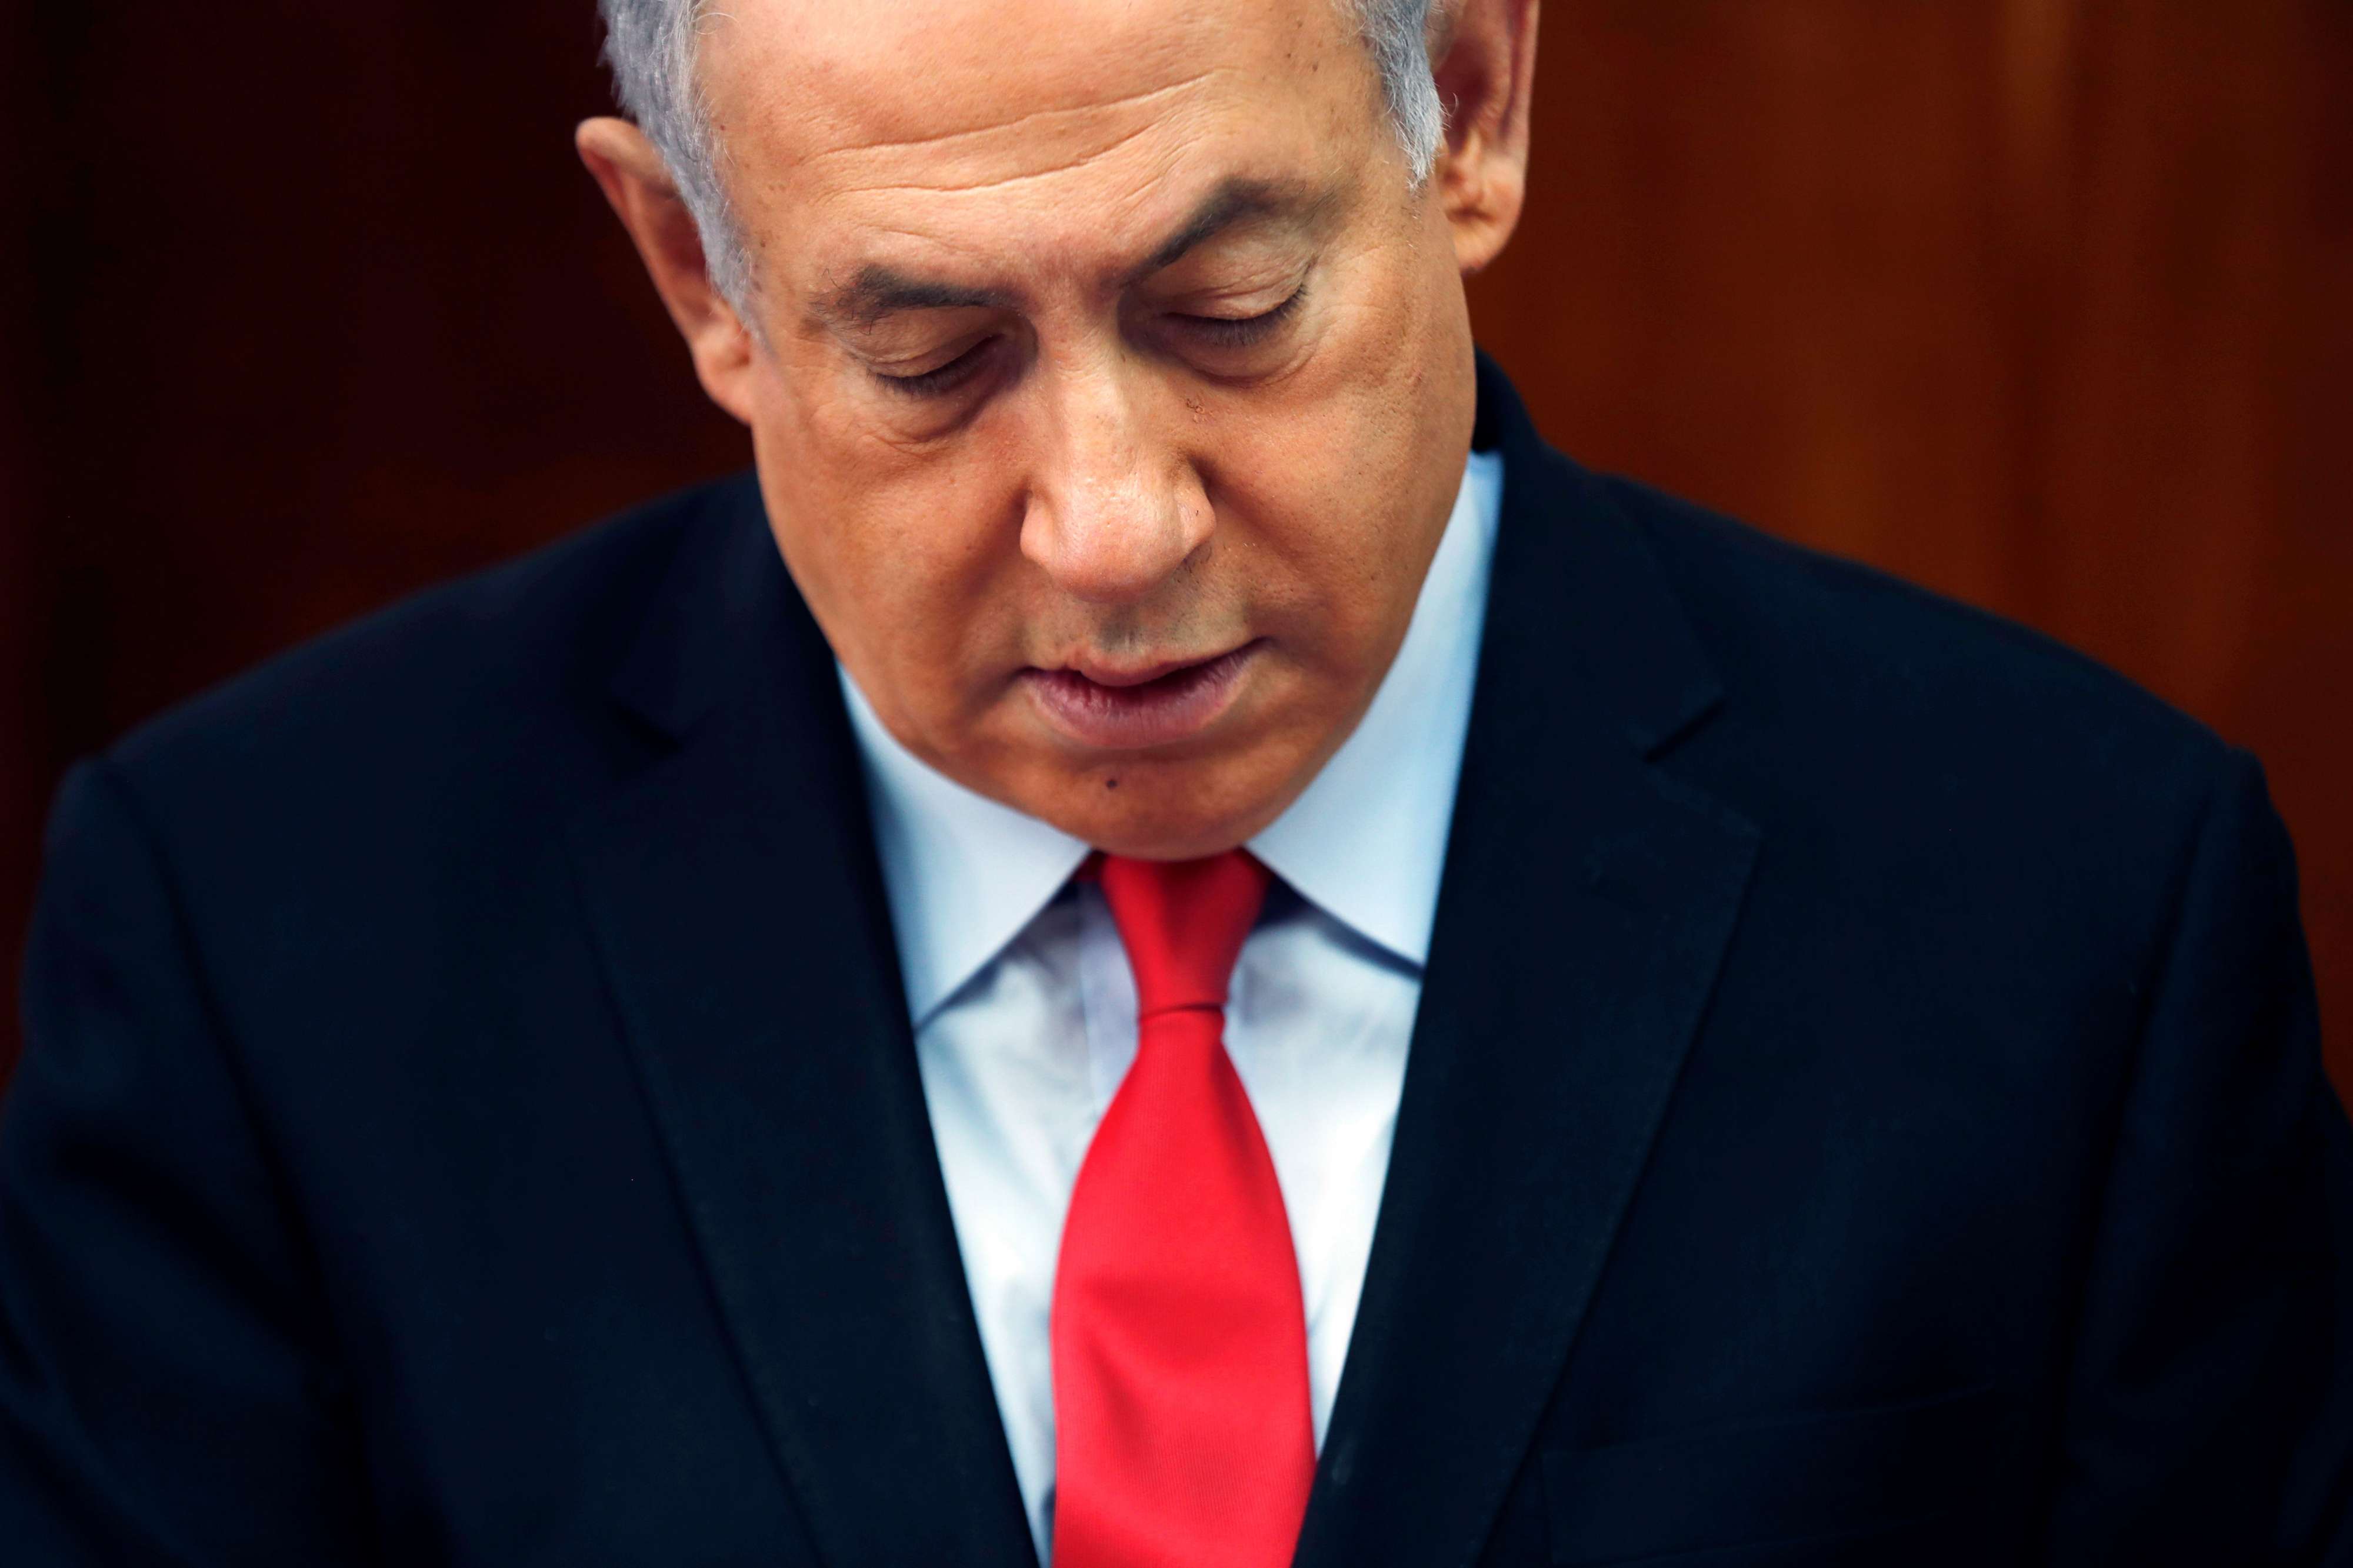 Netanyahu has vehemently denied all the allegations, calling the corruption investigation a "witch-hunt"